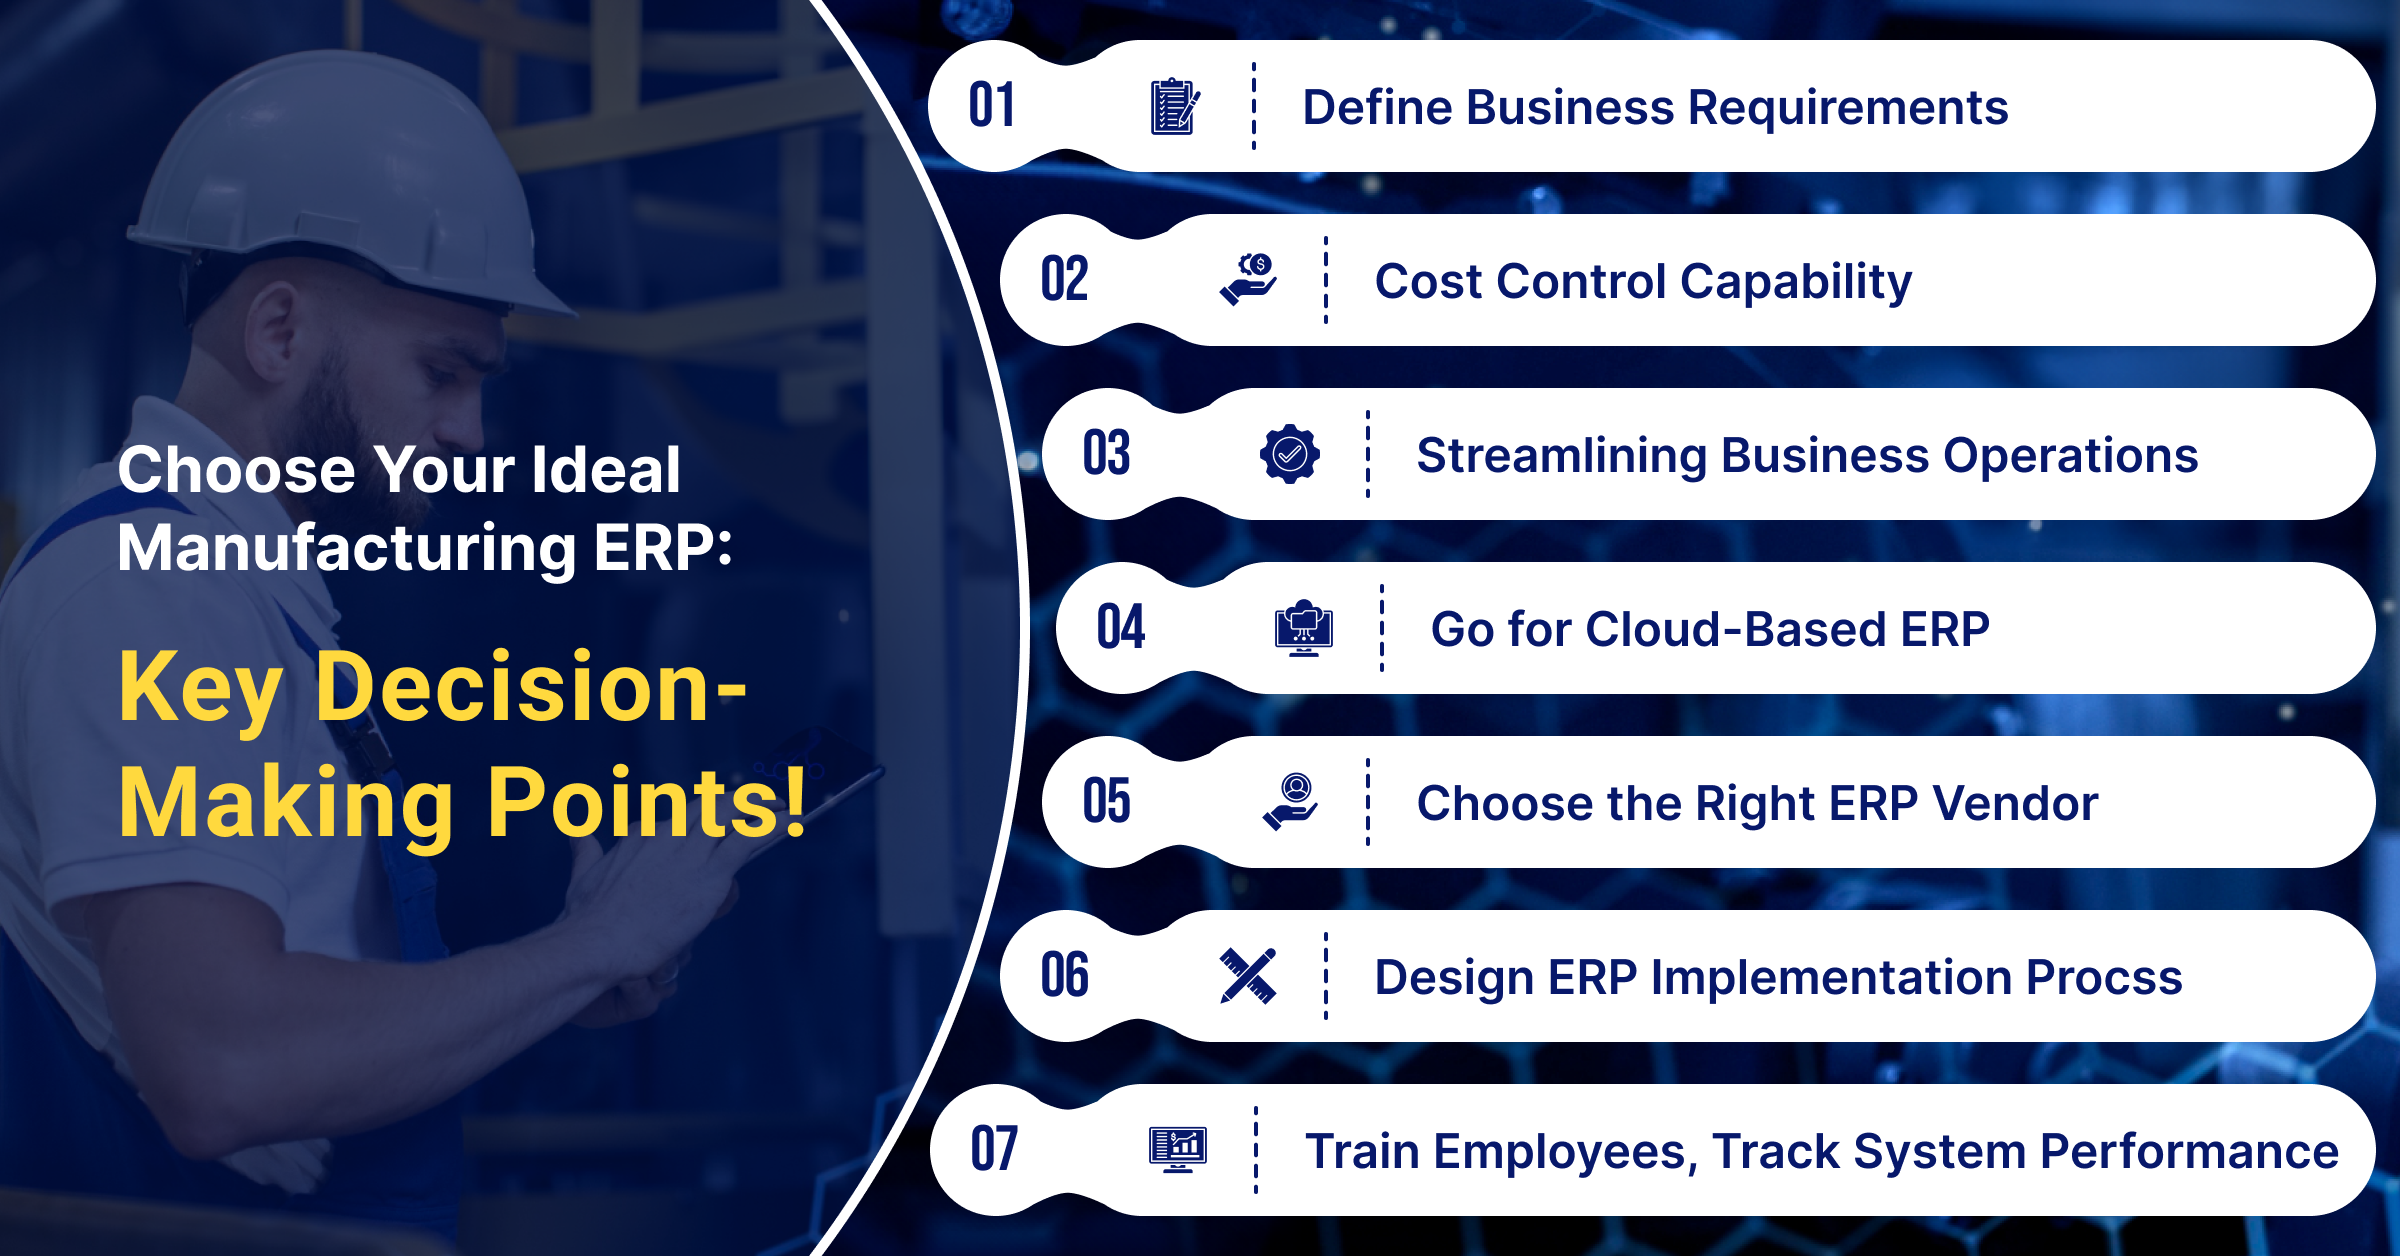 Choose Your Ideal Manufacturing ERP